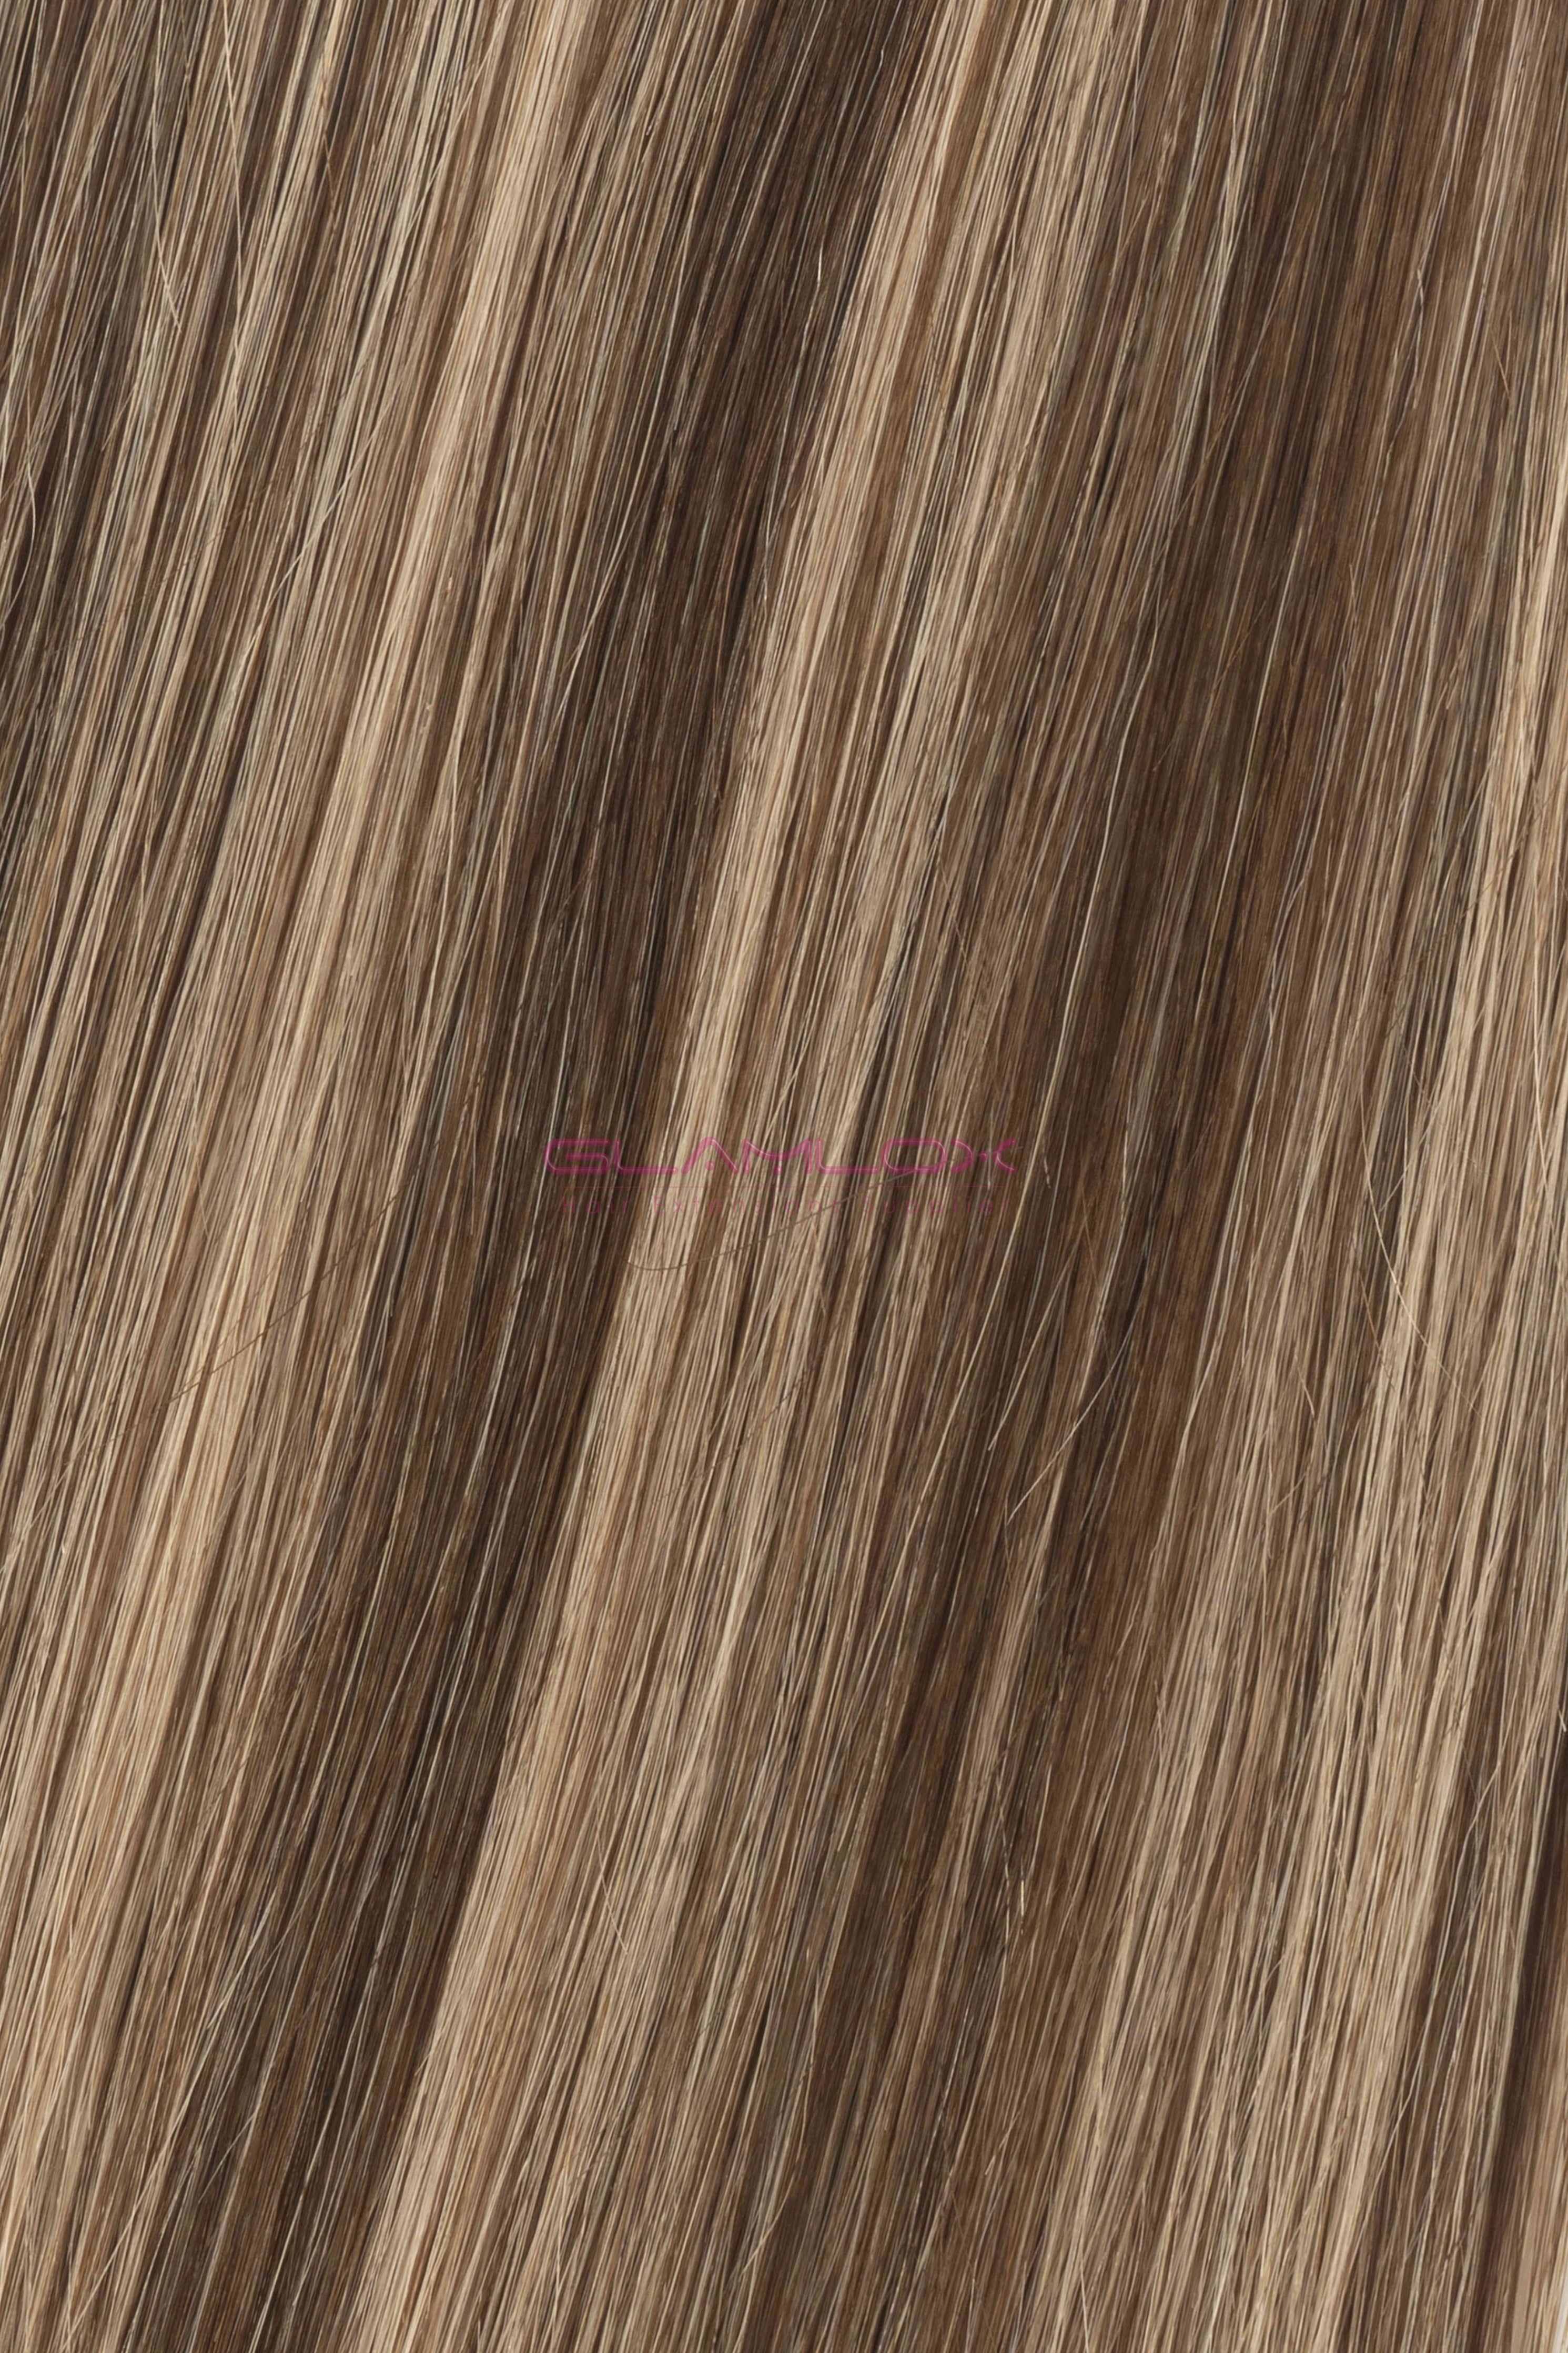 26" Nano Ring Hair Extensions - Russian Mongolian Double Drawn Remy Human Hair - 100 Strands